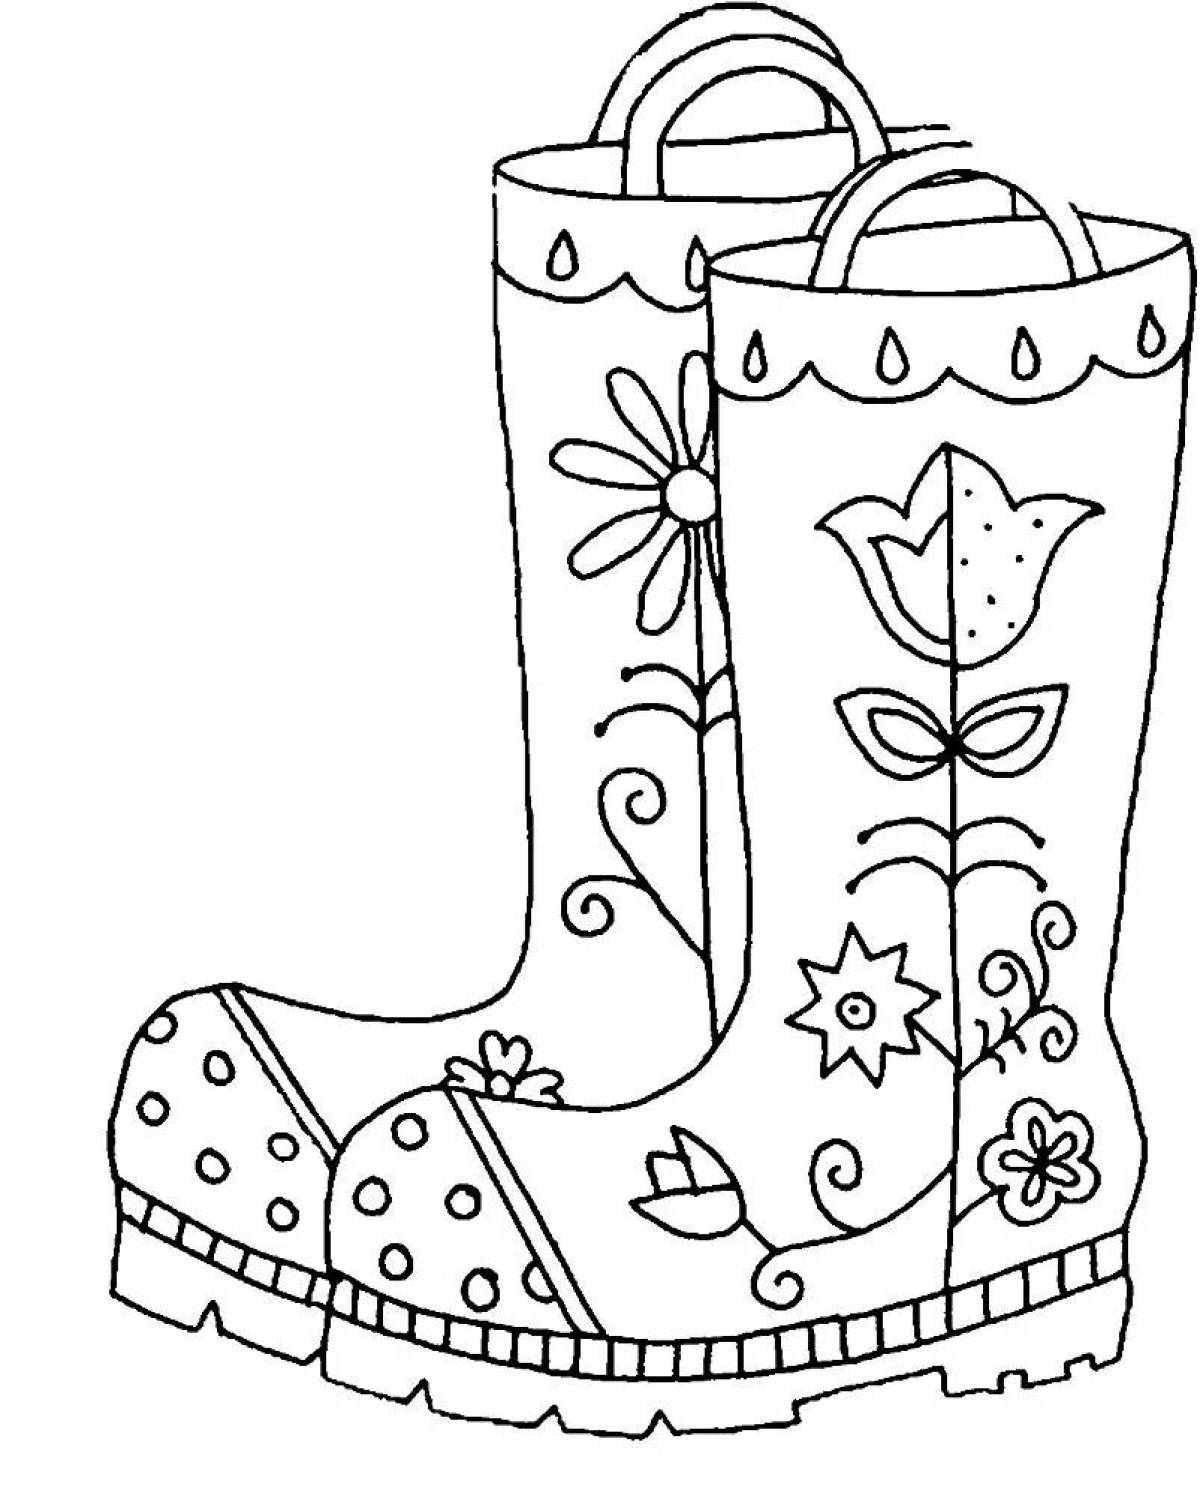 Live baby shoes coloring page